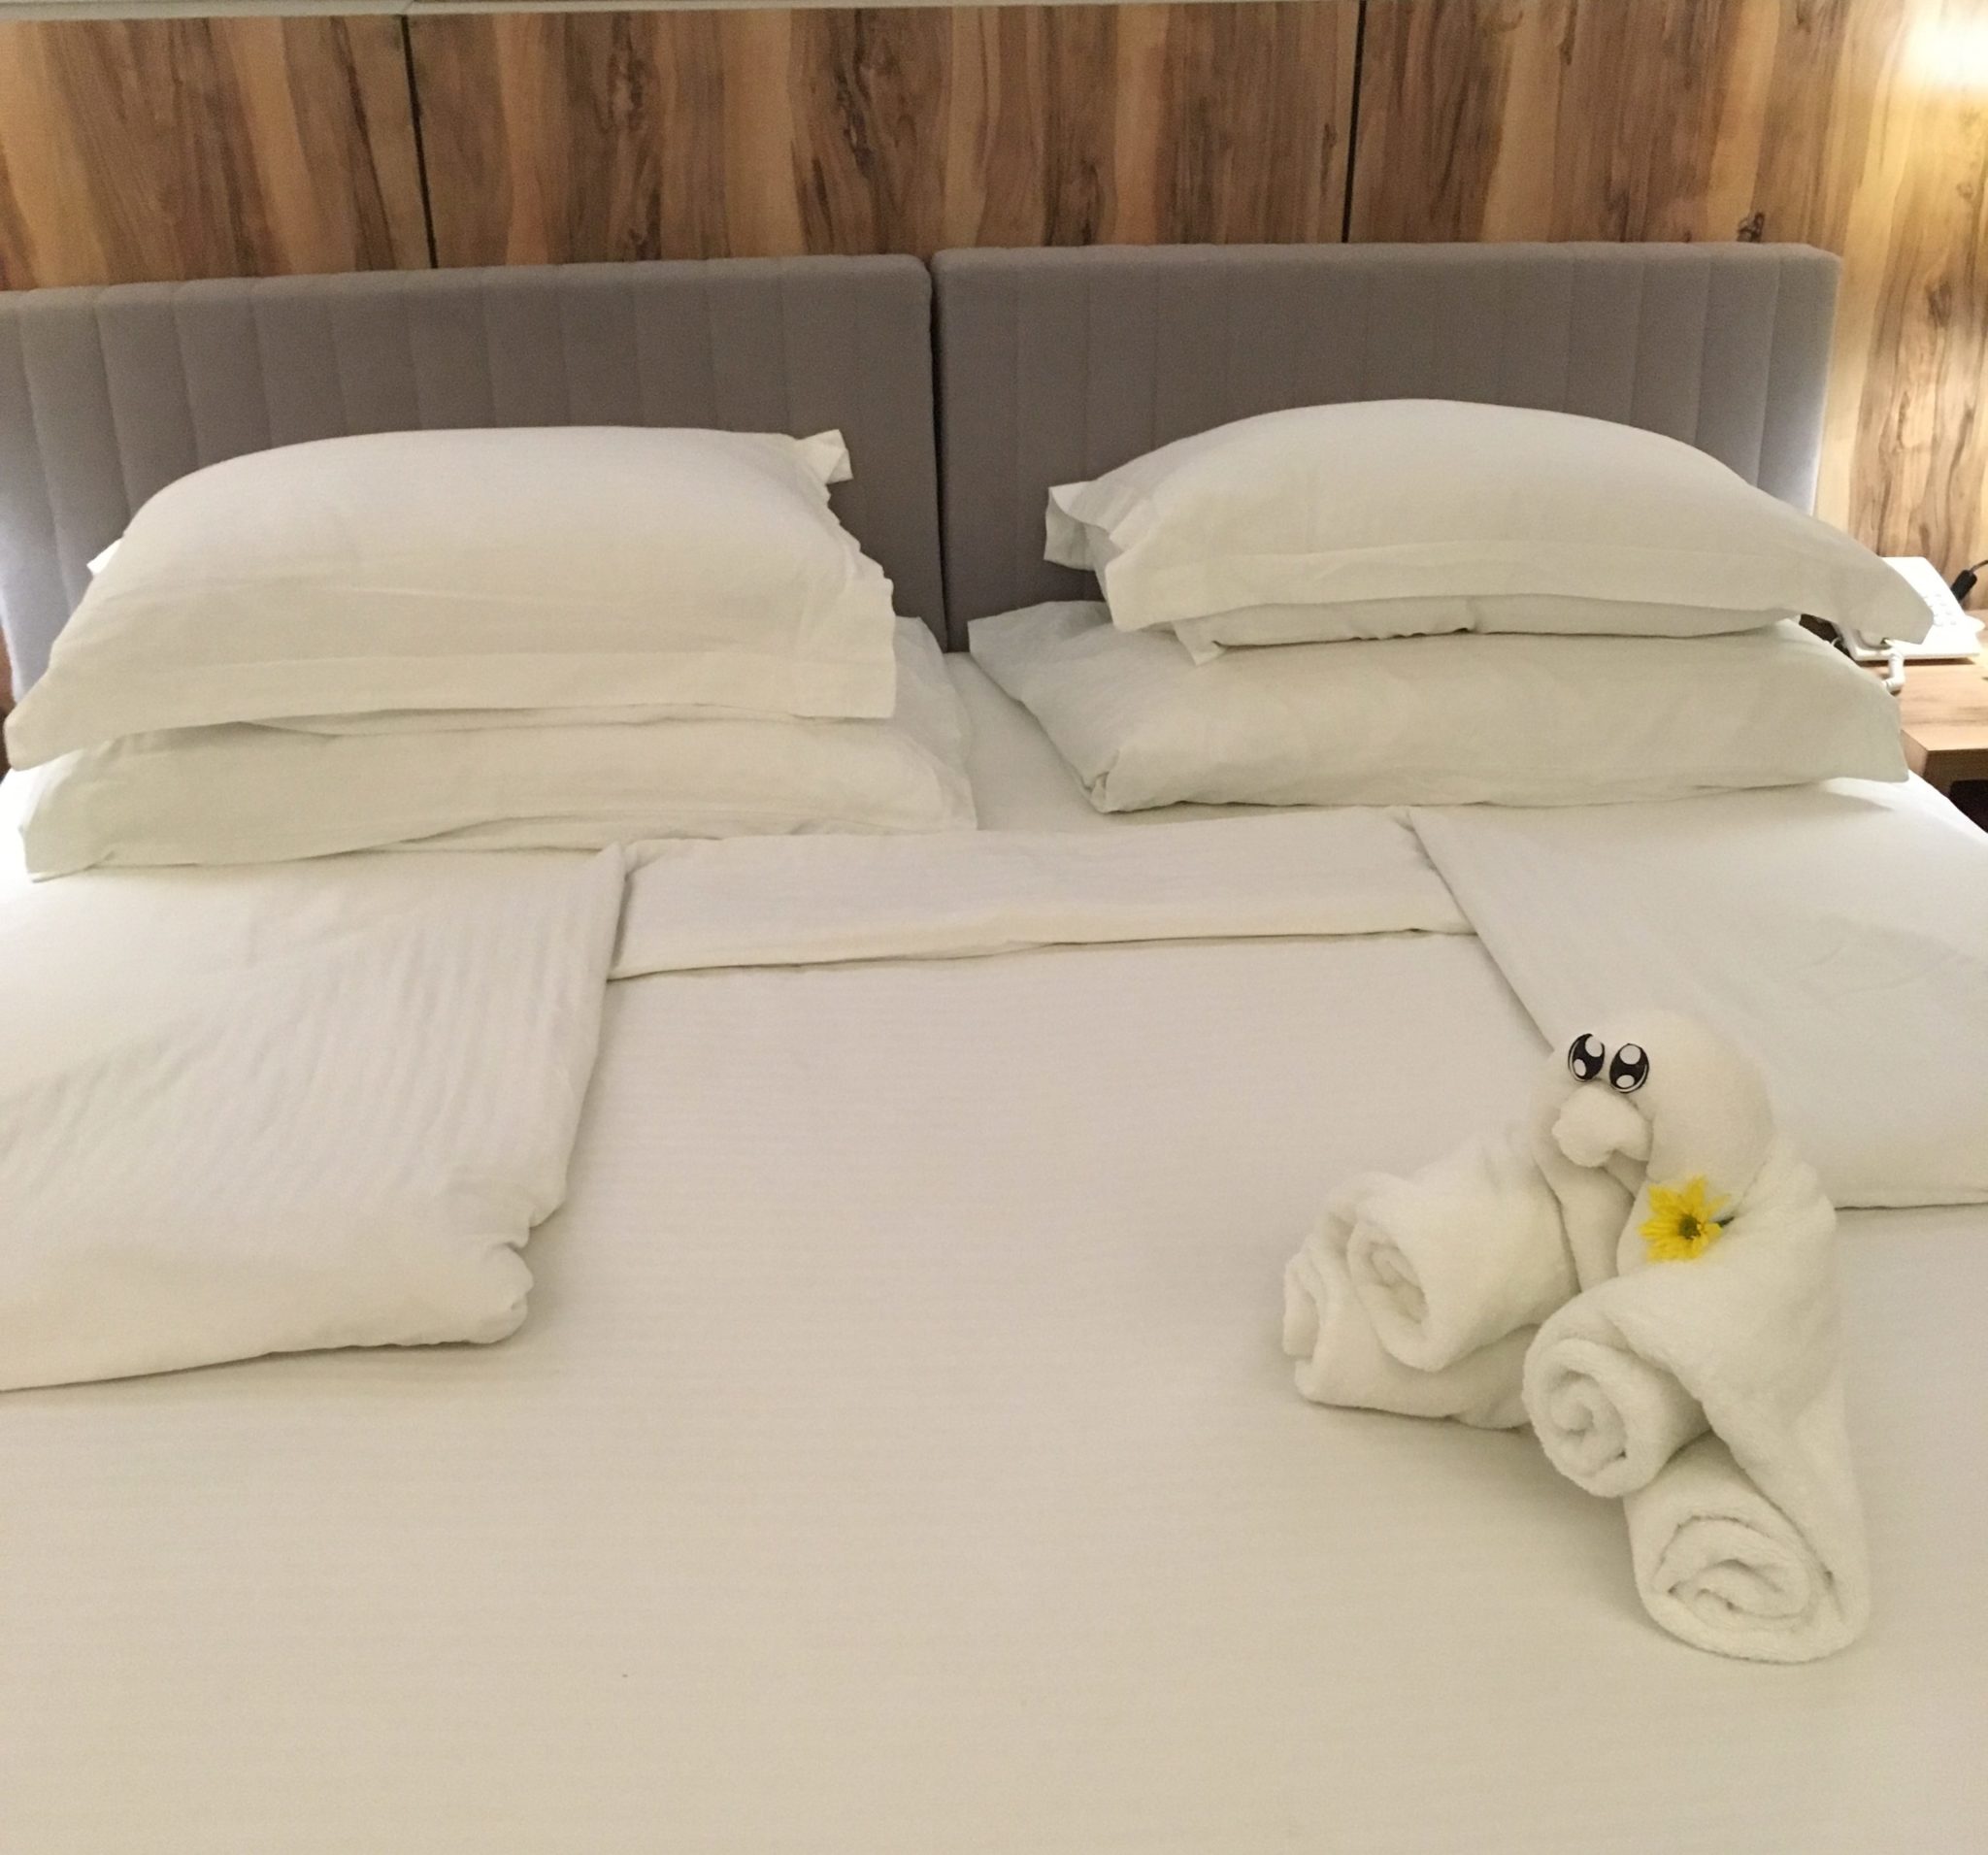 Towel art on a white king size bed